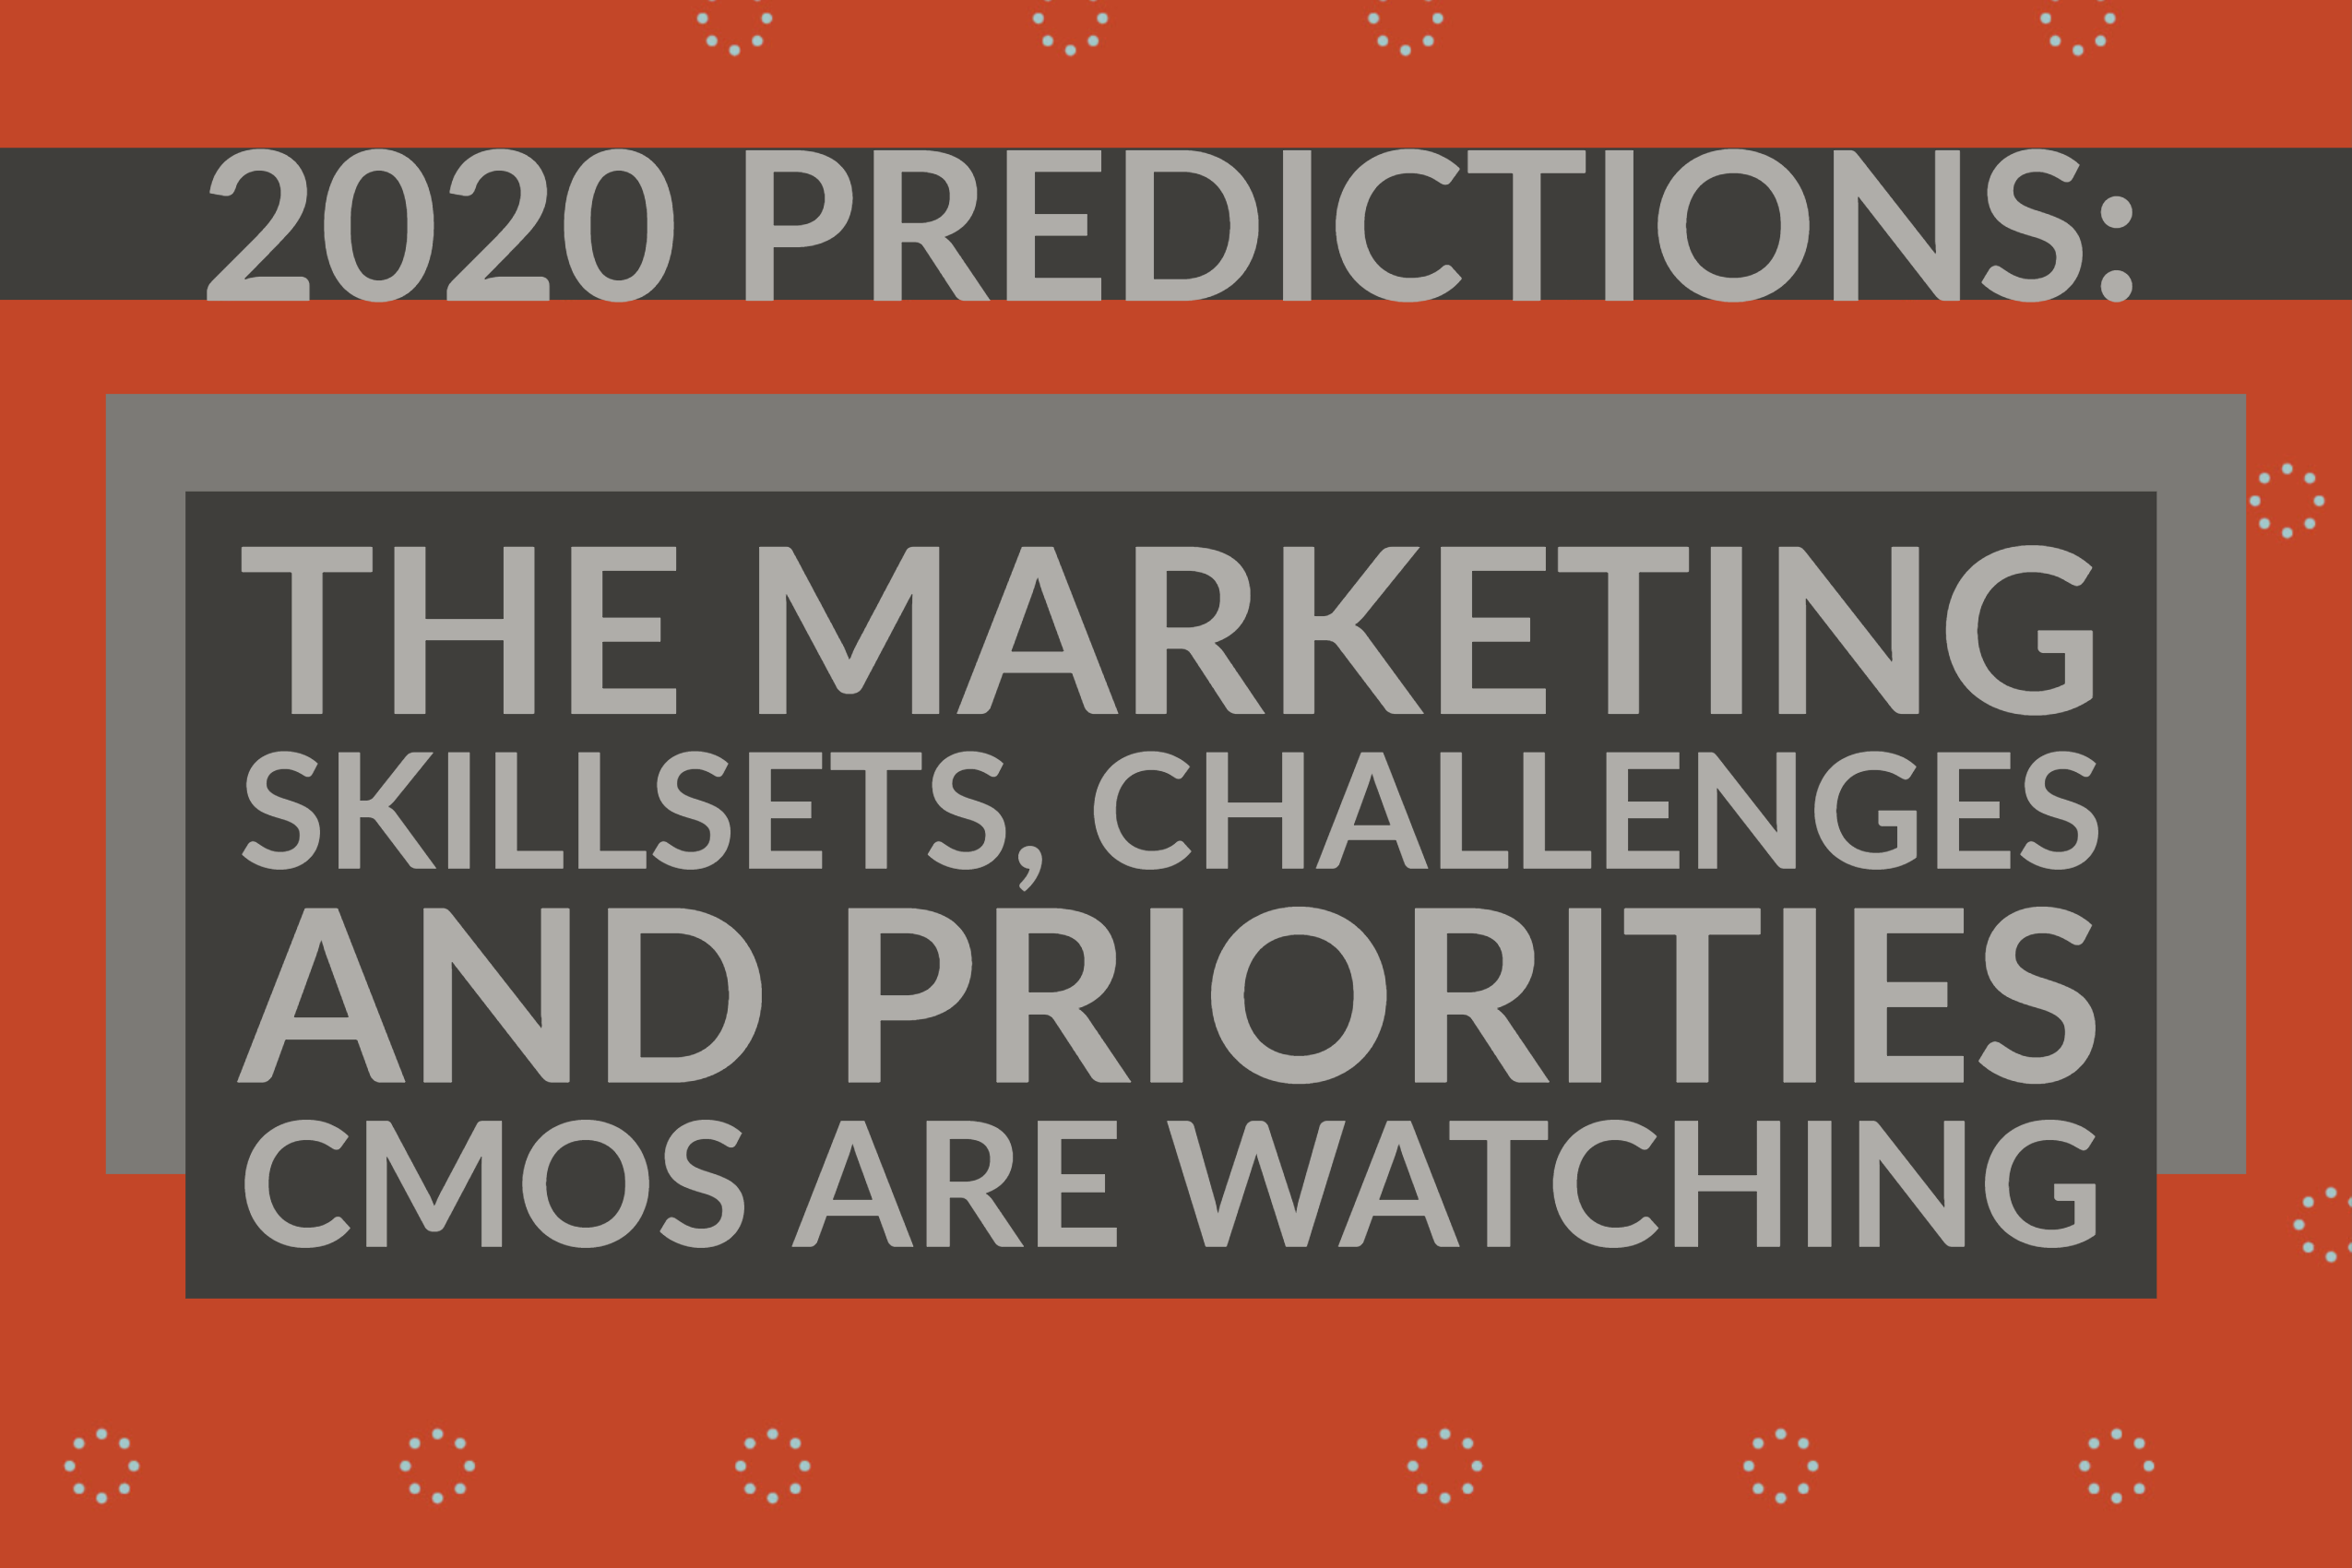 2020 Predictions: The Marketing Skillsets, Challenges and Priorities CMOS Are Watching